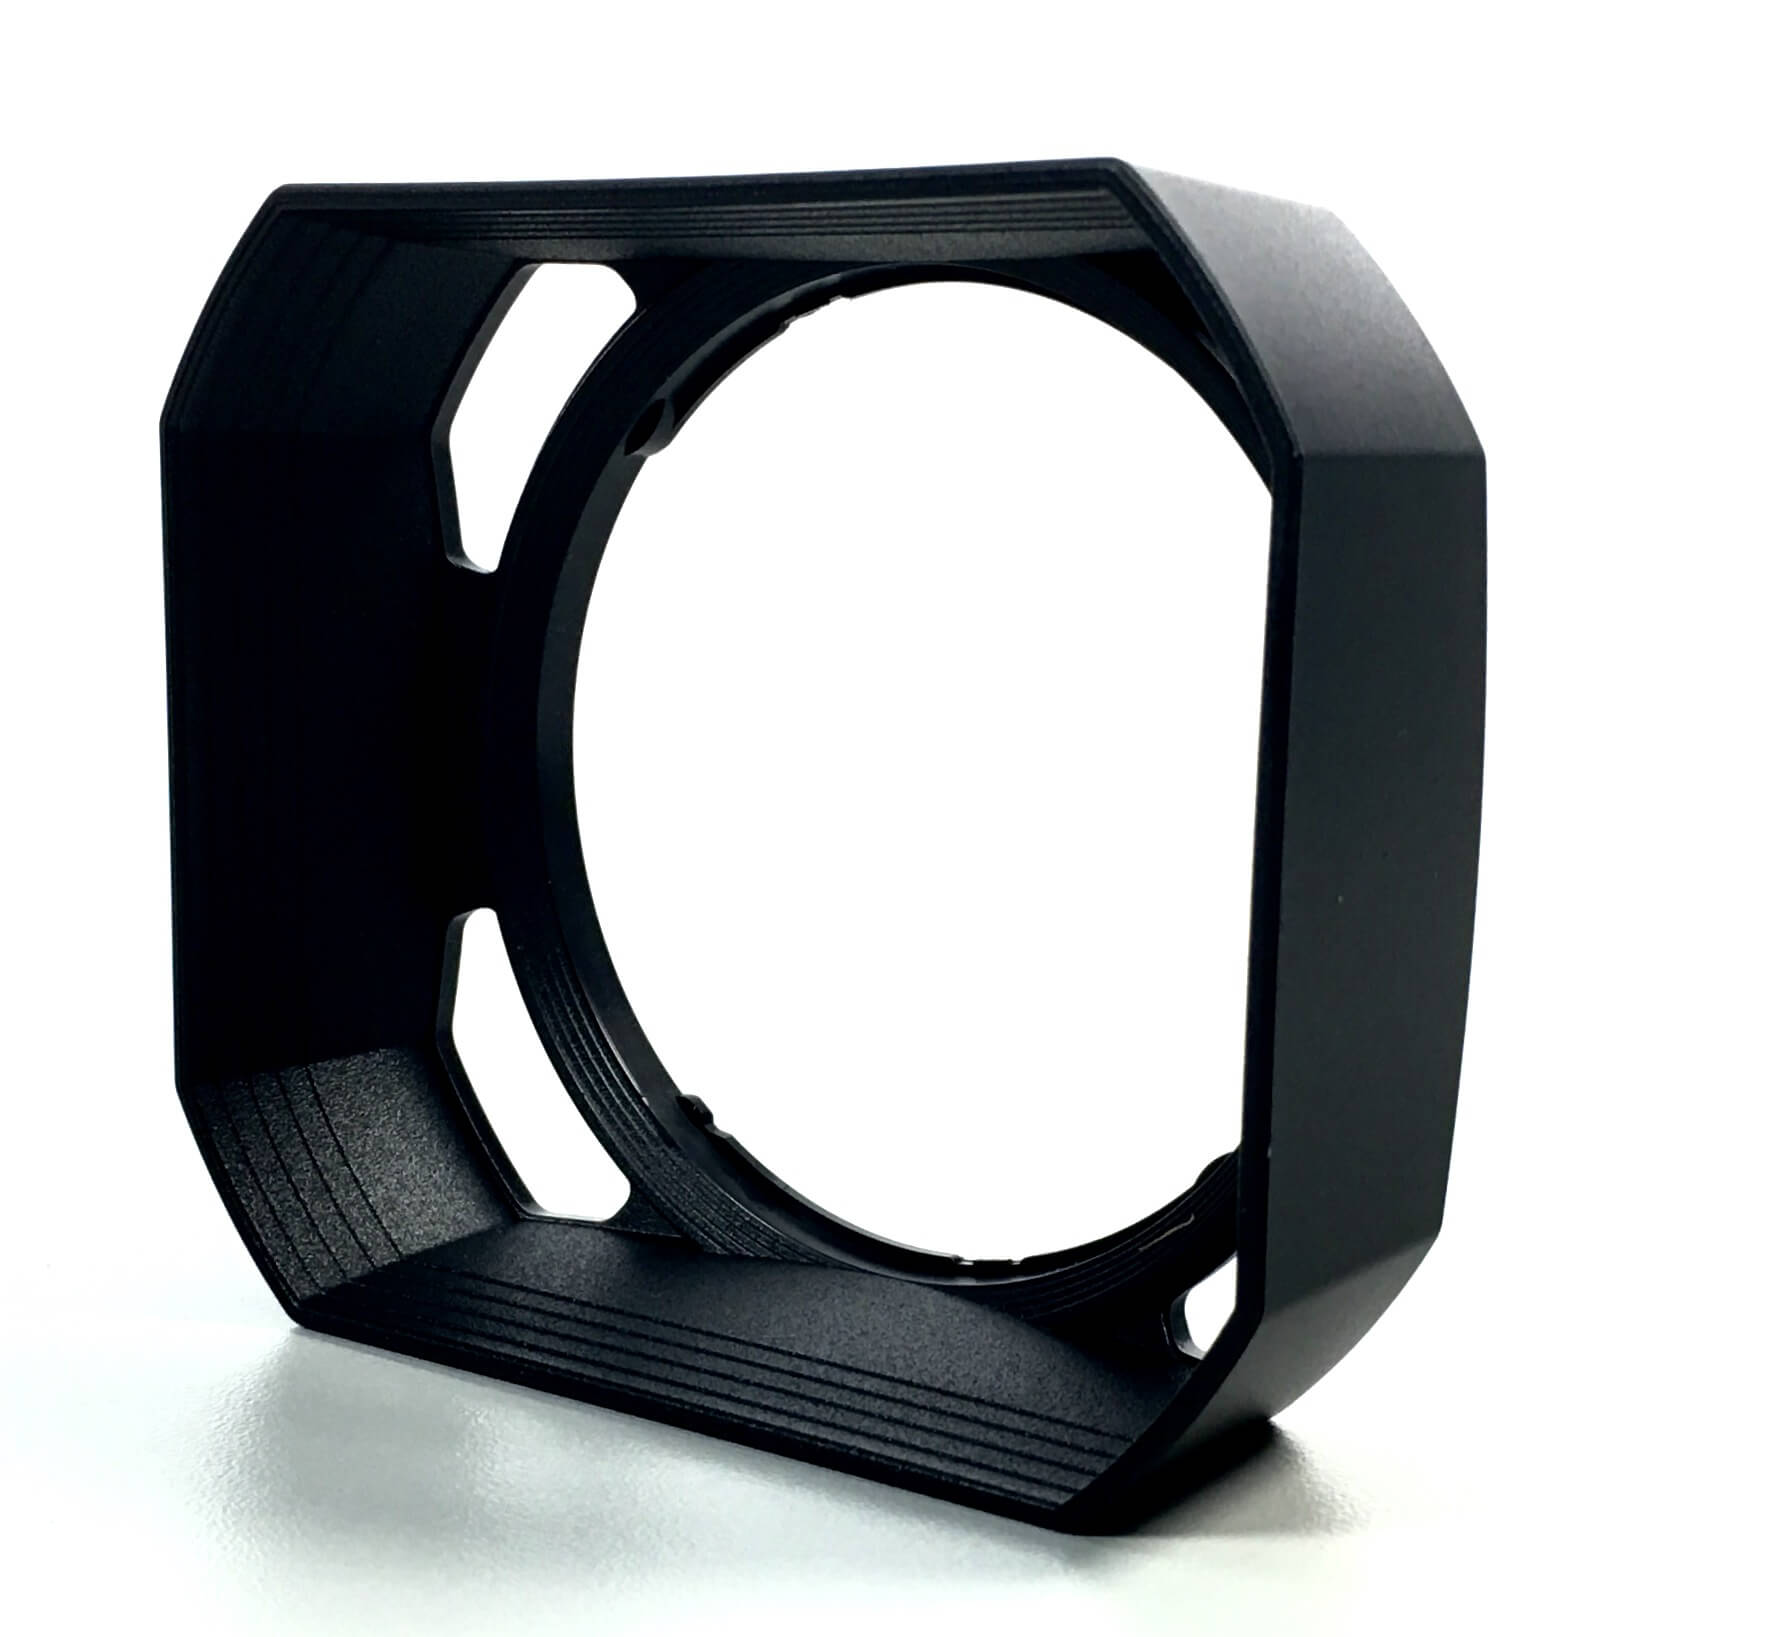 Original Lens Hood Rectangle Square that fits on the Sony FDR-AX100 camcorder. It is a genuine Sony part, sourced directly from Sony USA. Brand new factory fresh. Free Shipping.